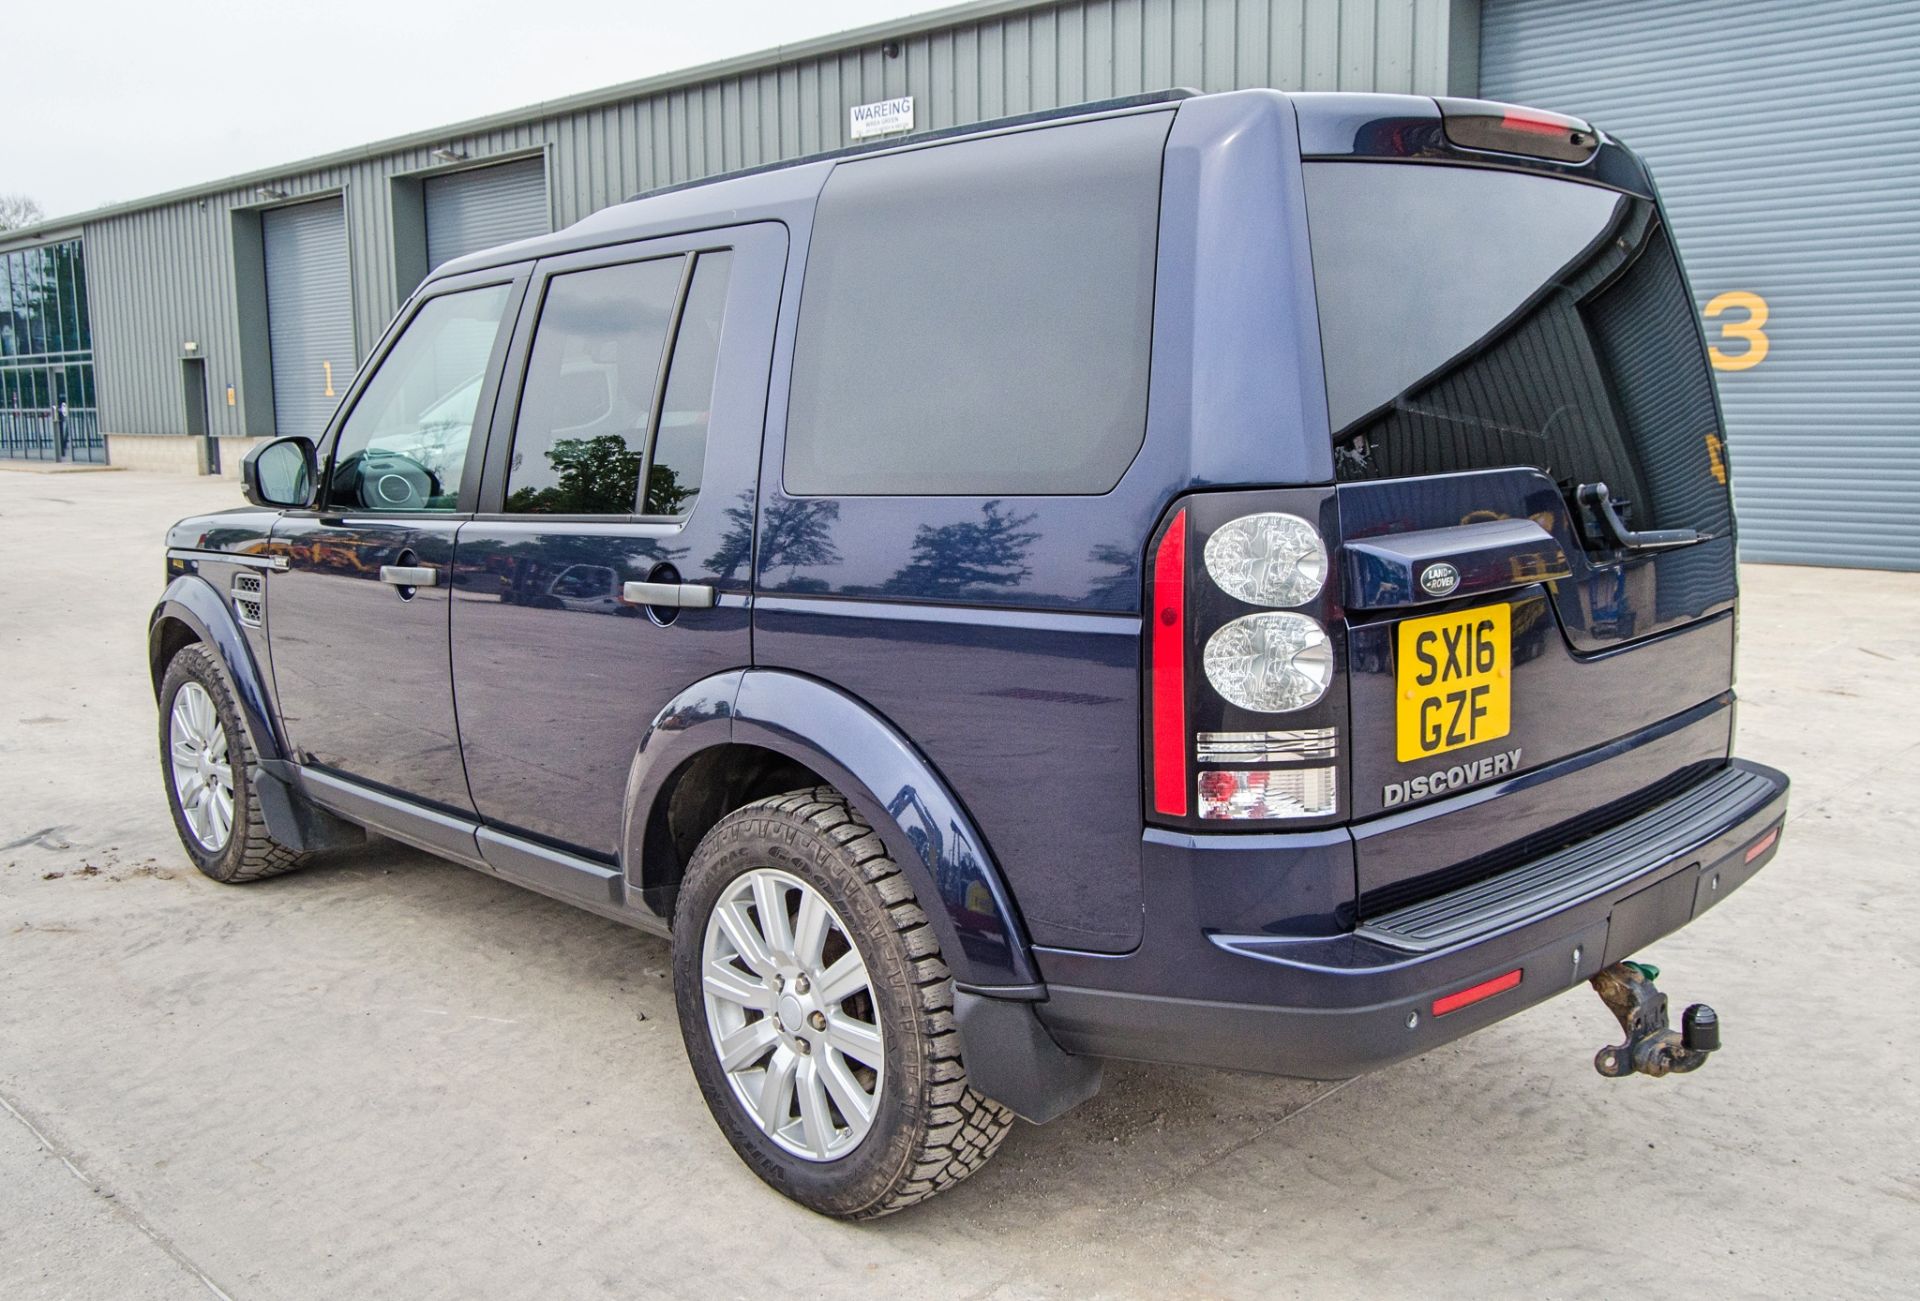 Land Rover Discovery 4 3.0 SDV6 SE Commercial auto 4 wheel drive utility vehicle  Registration - Image 4 of 39